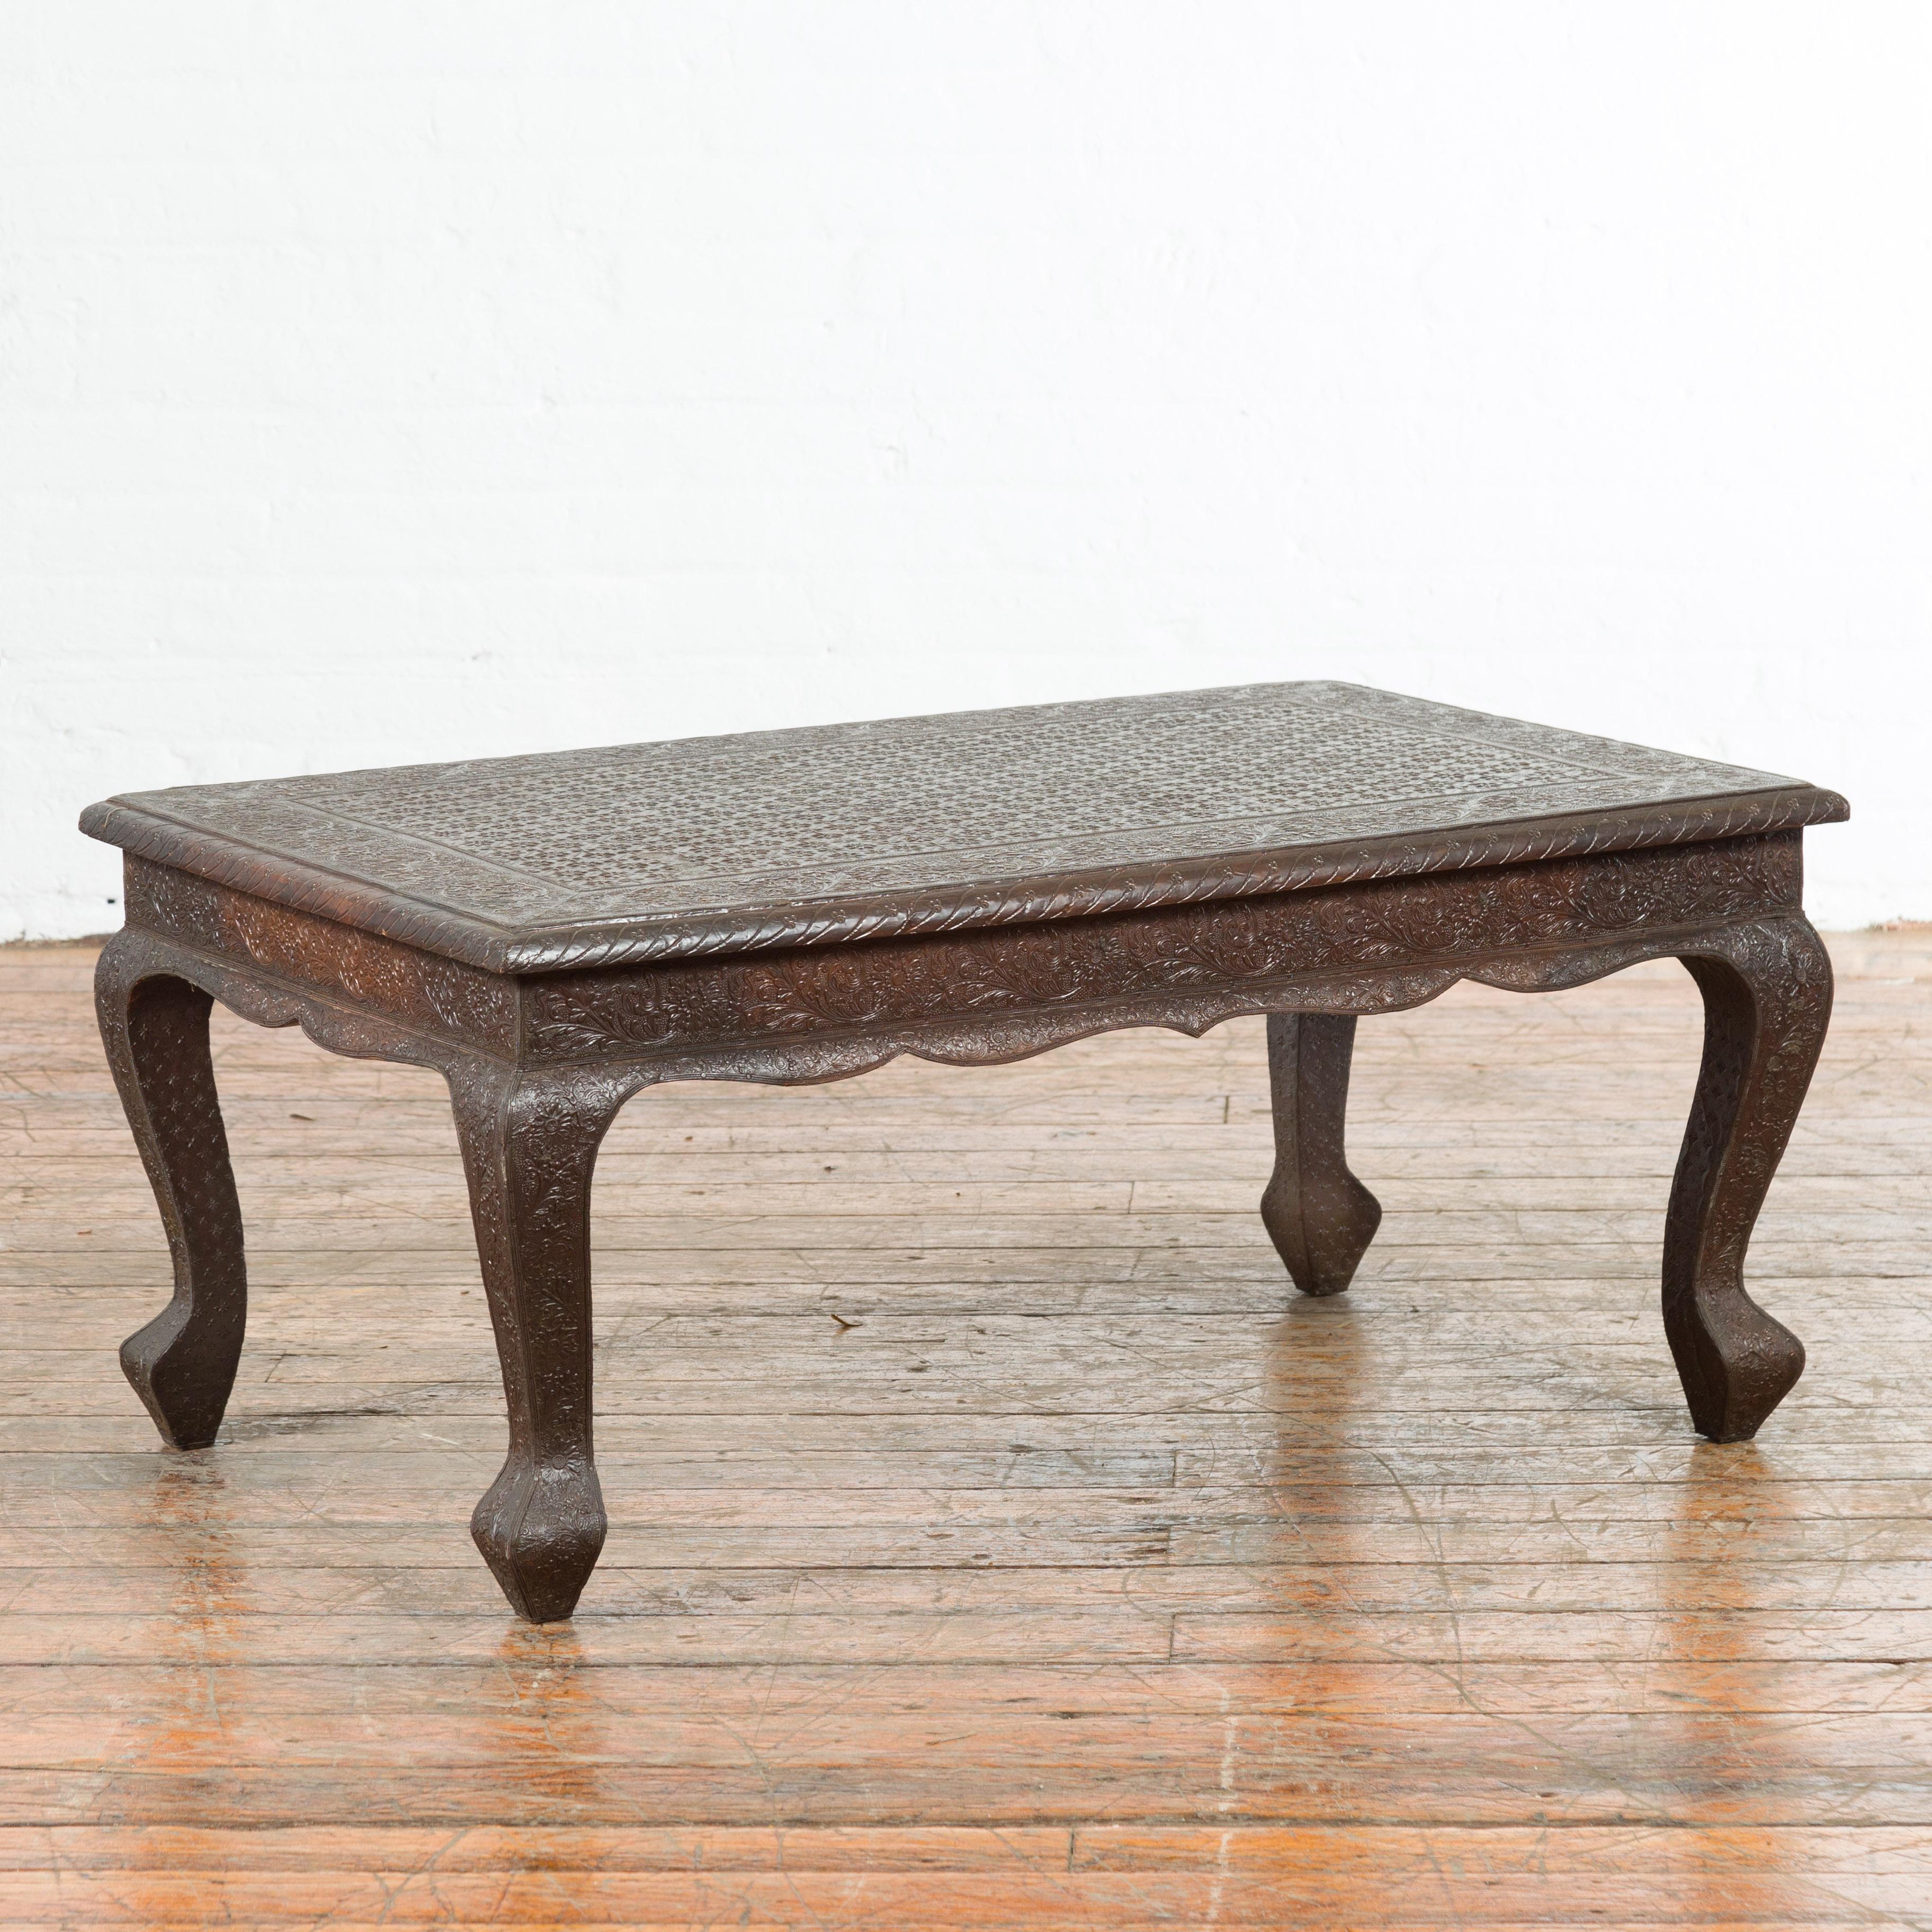 An Indian vintage metal coffee table from the mid 20th century, with embossed design created with metal dyes, floral motifs and cabriole legs. Created in India during the midcentury period, this coffee table features a rectangular top adorned with